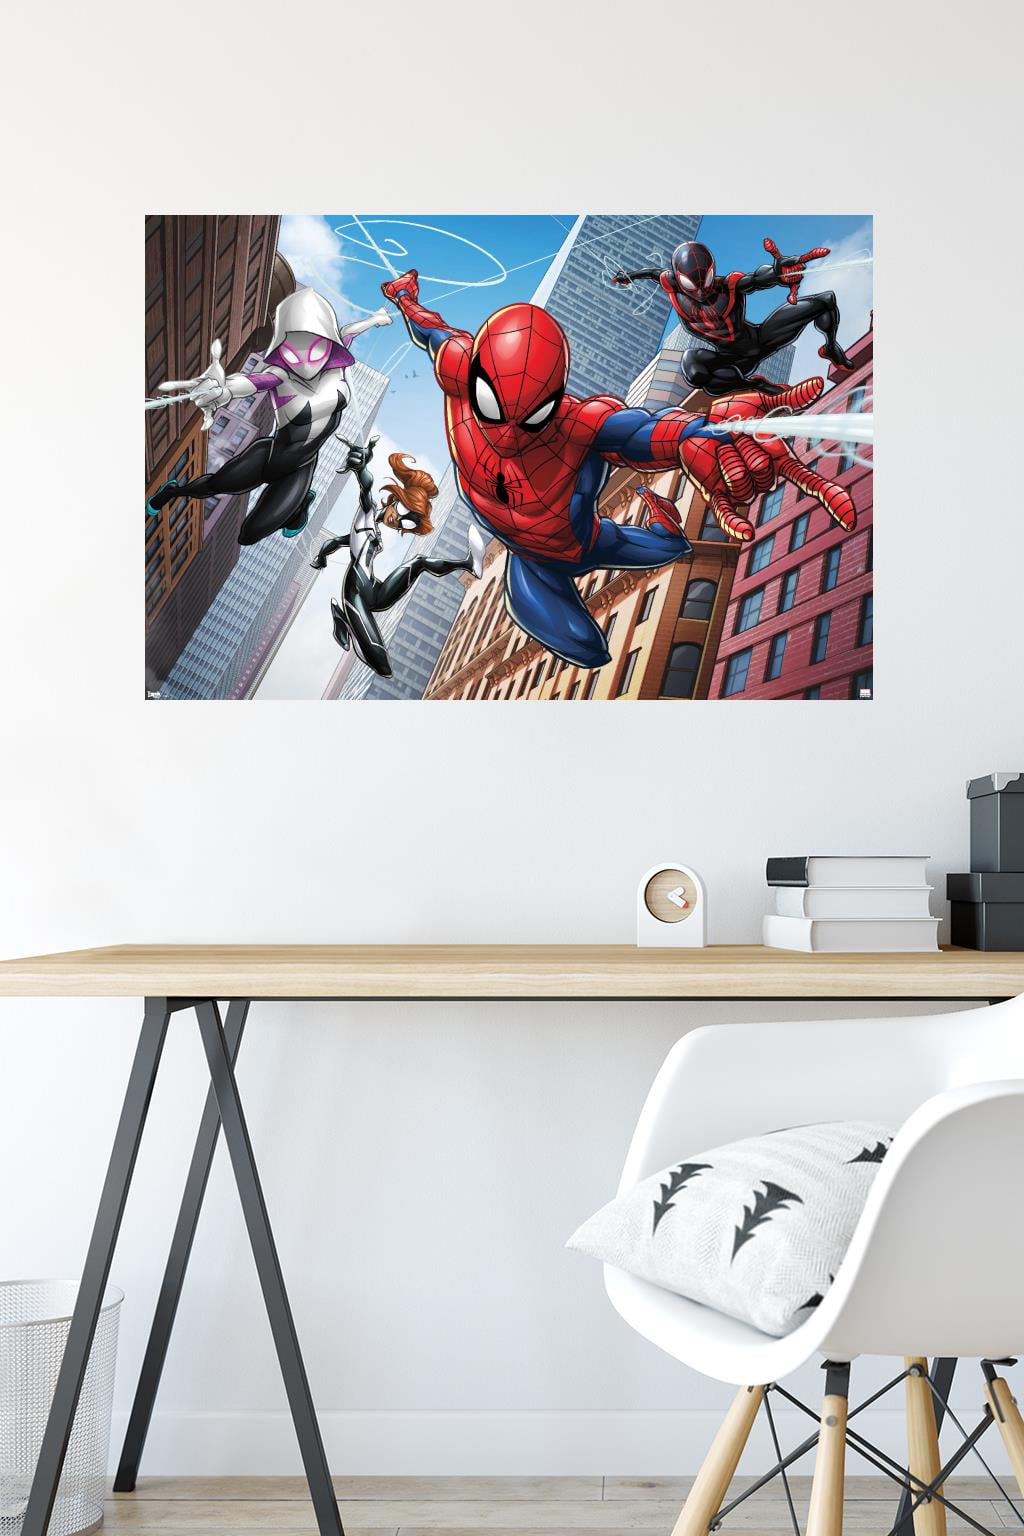 Marvel Spidey and His Amazing Friends - Webs Wall Poster, 22.375 x 34